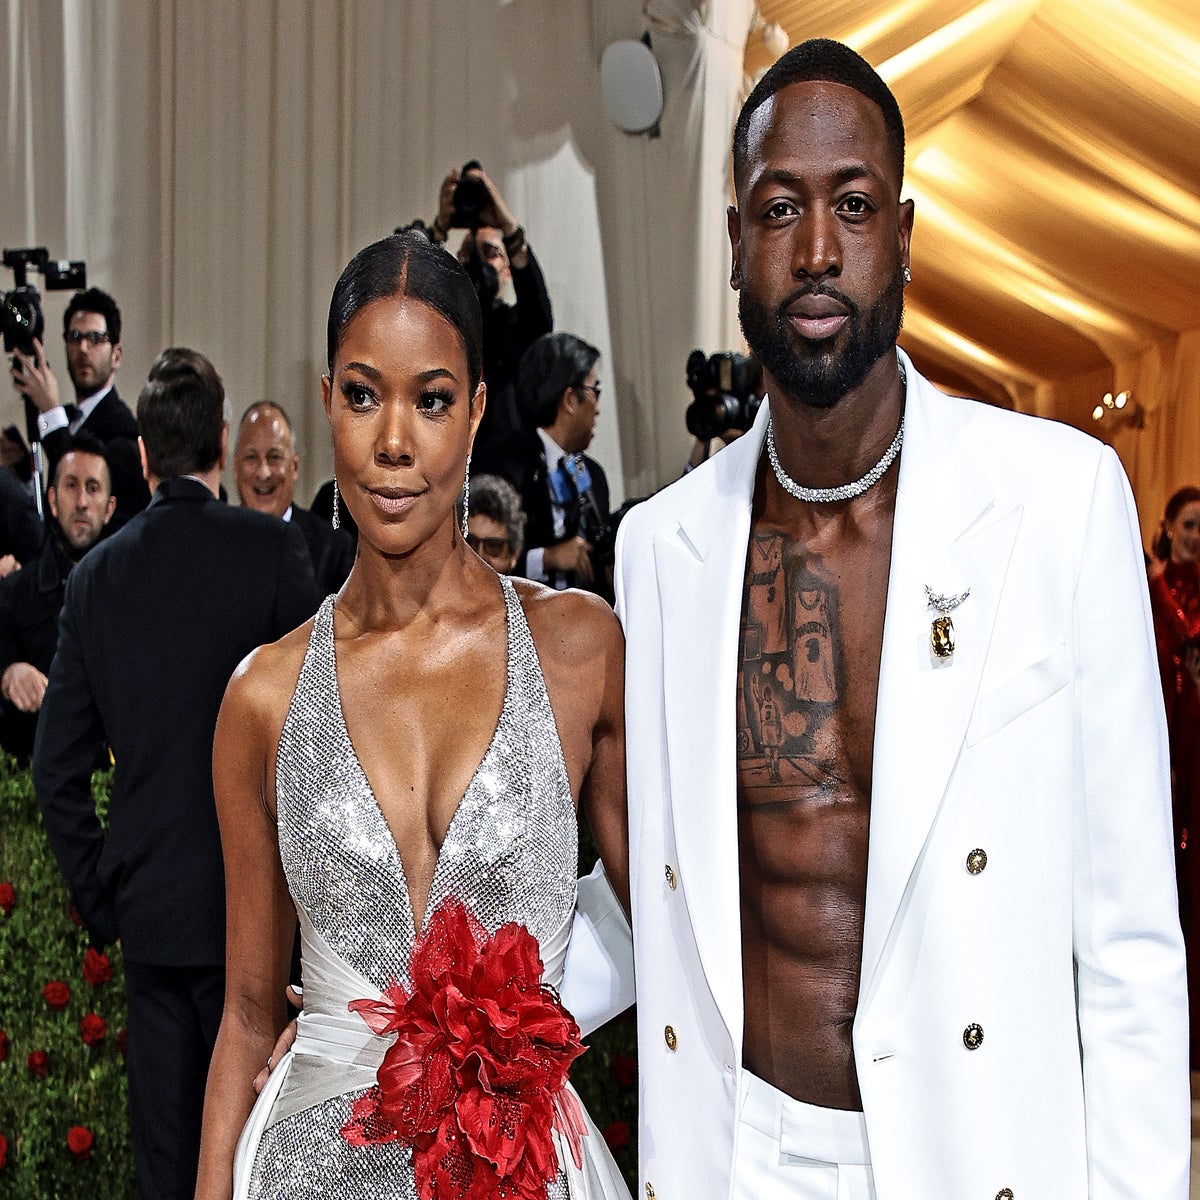 Dwyane Wade says he 'tried to break up' with Gabrielle Union before revealing he fathered baby with another woman | The Independent